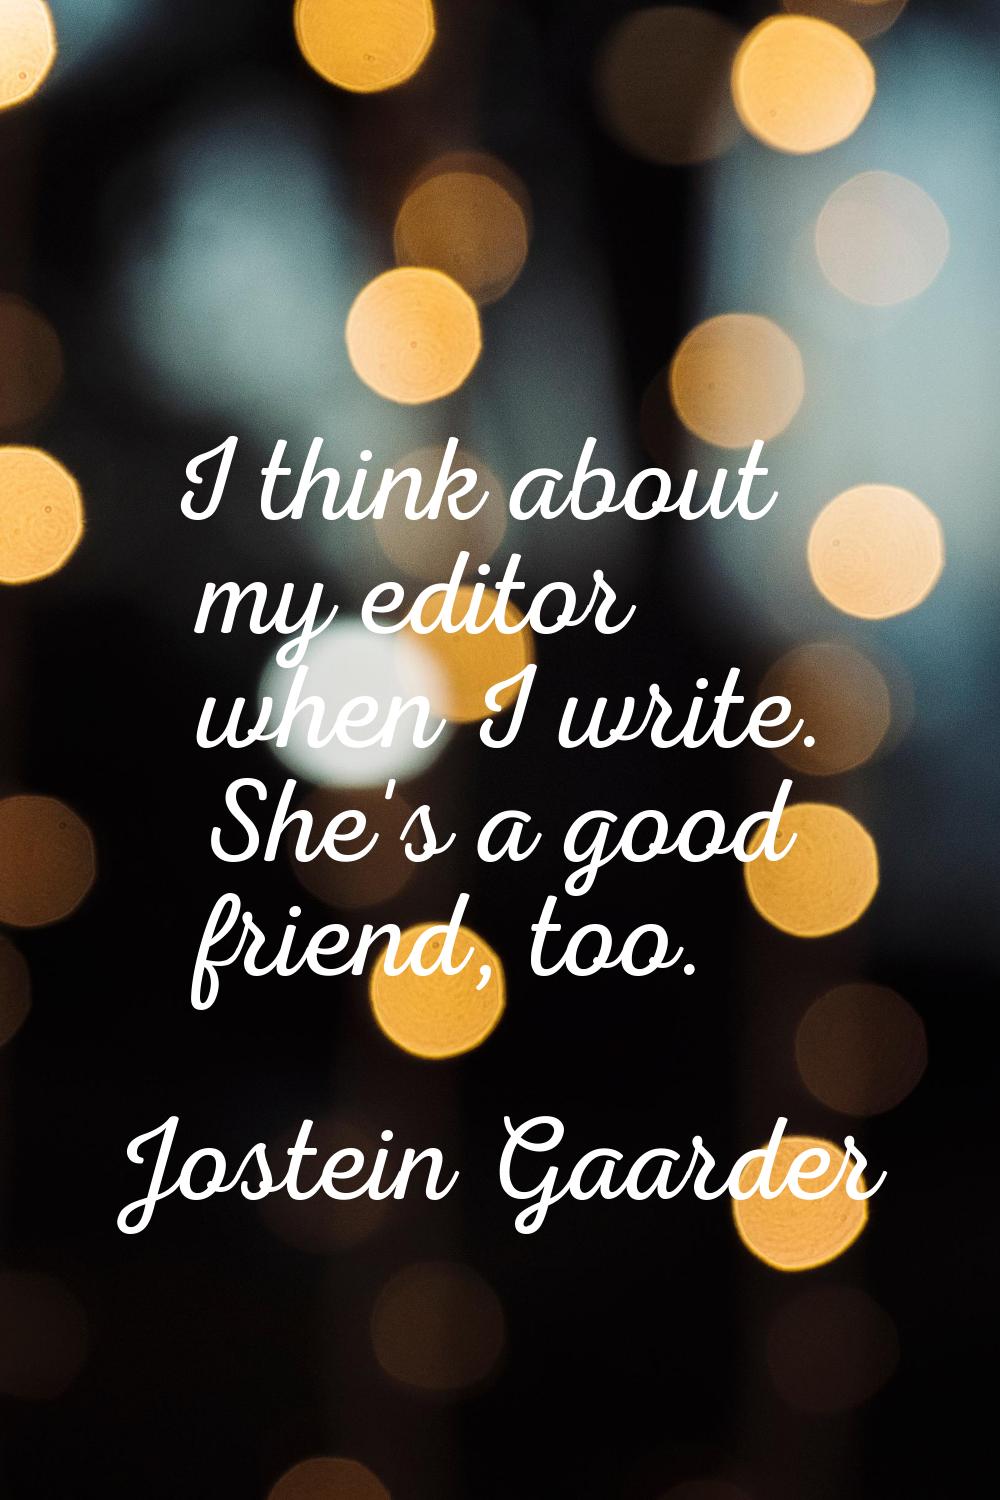 I think about my editor when I write. She's a good friend, too.